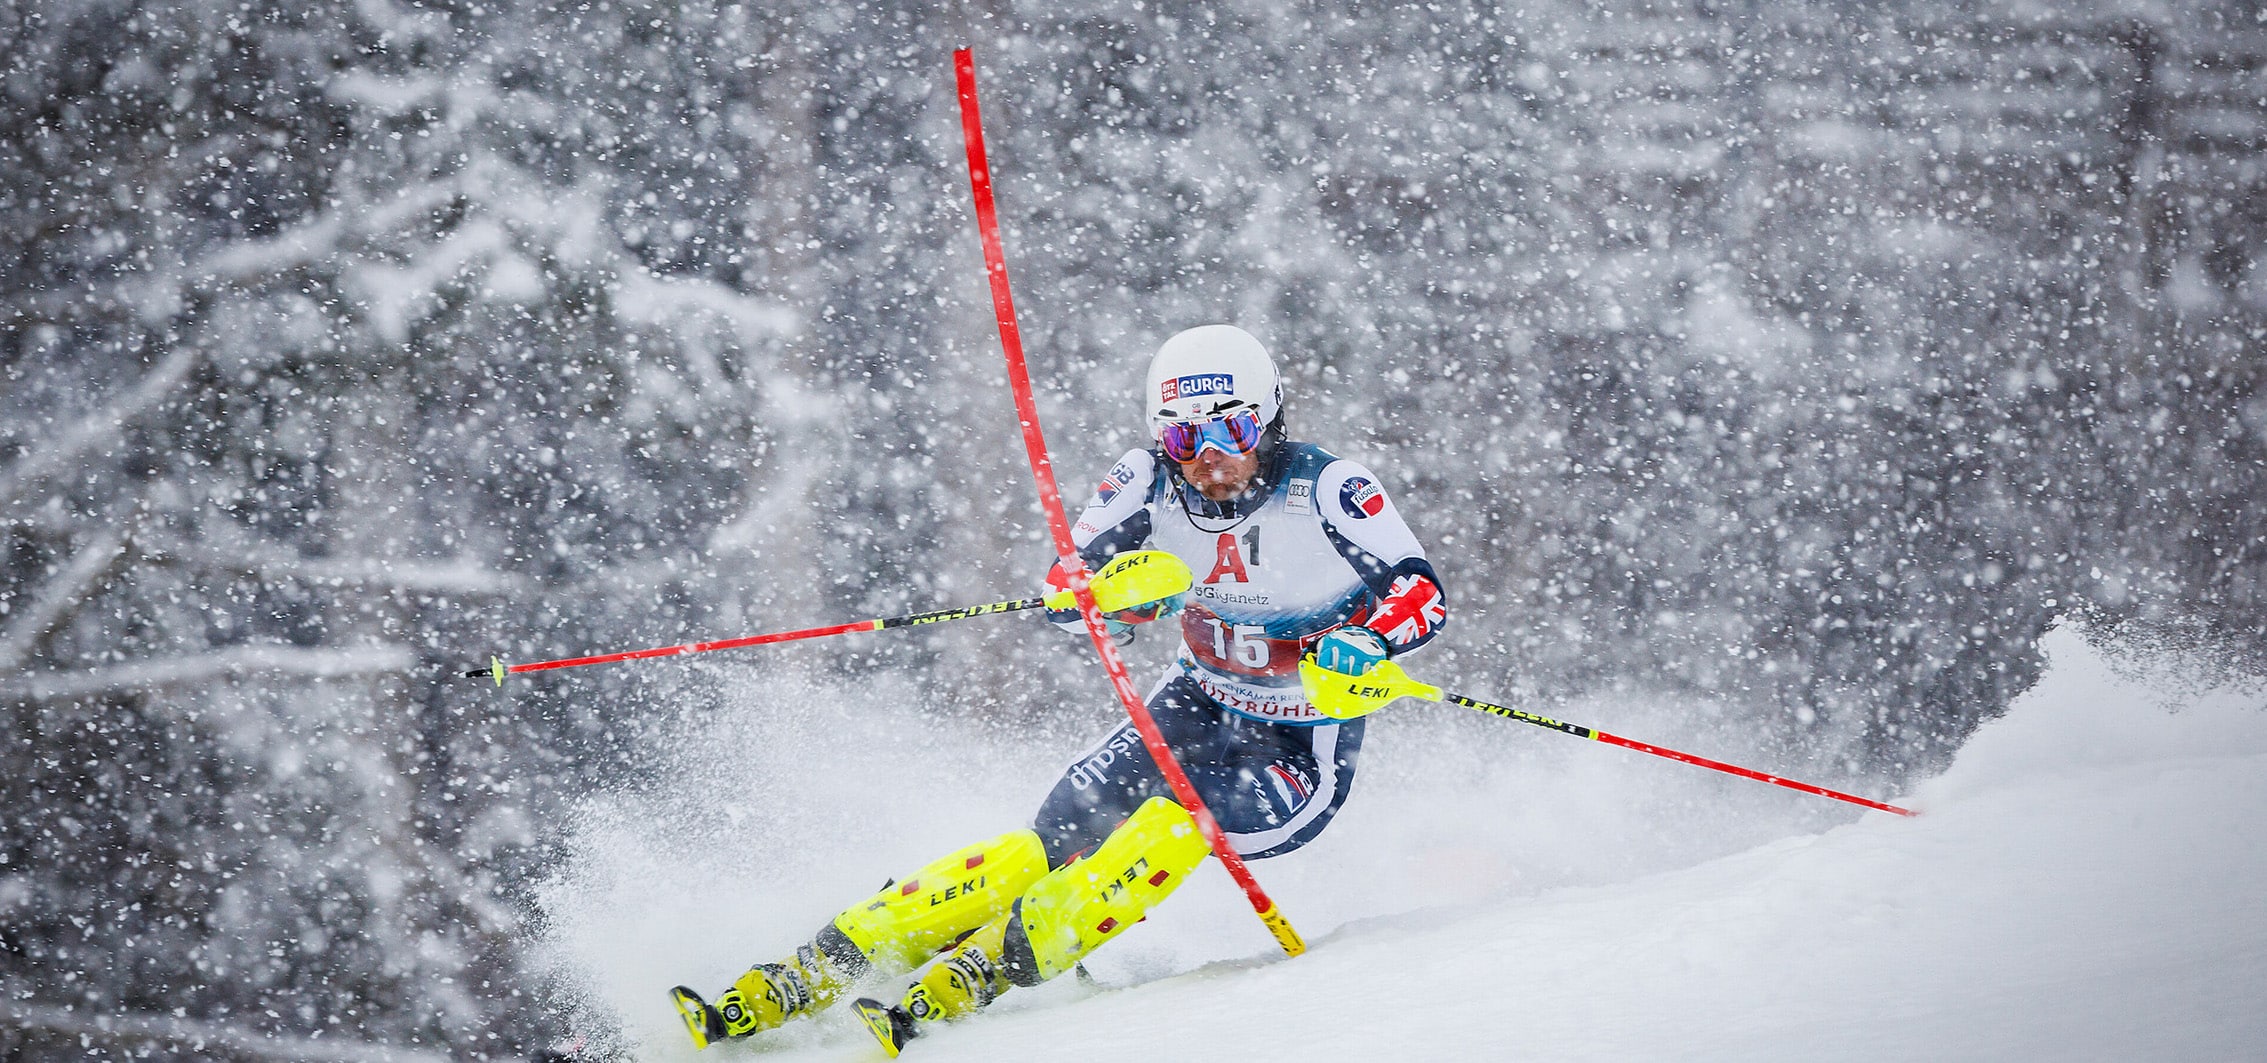 Dave ryding of great britain competes during fis world cup slalom in kitzbuhel, austria on january 22, 2022